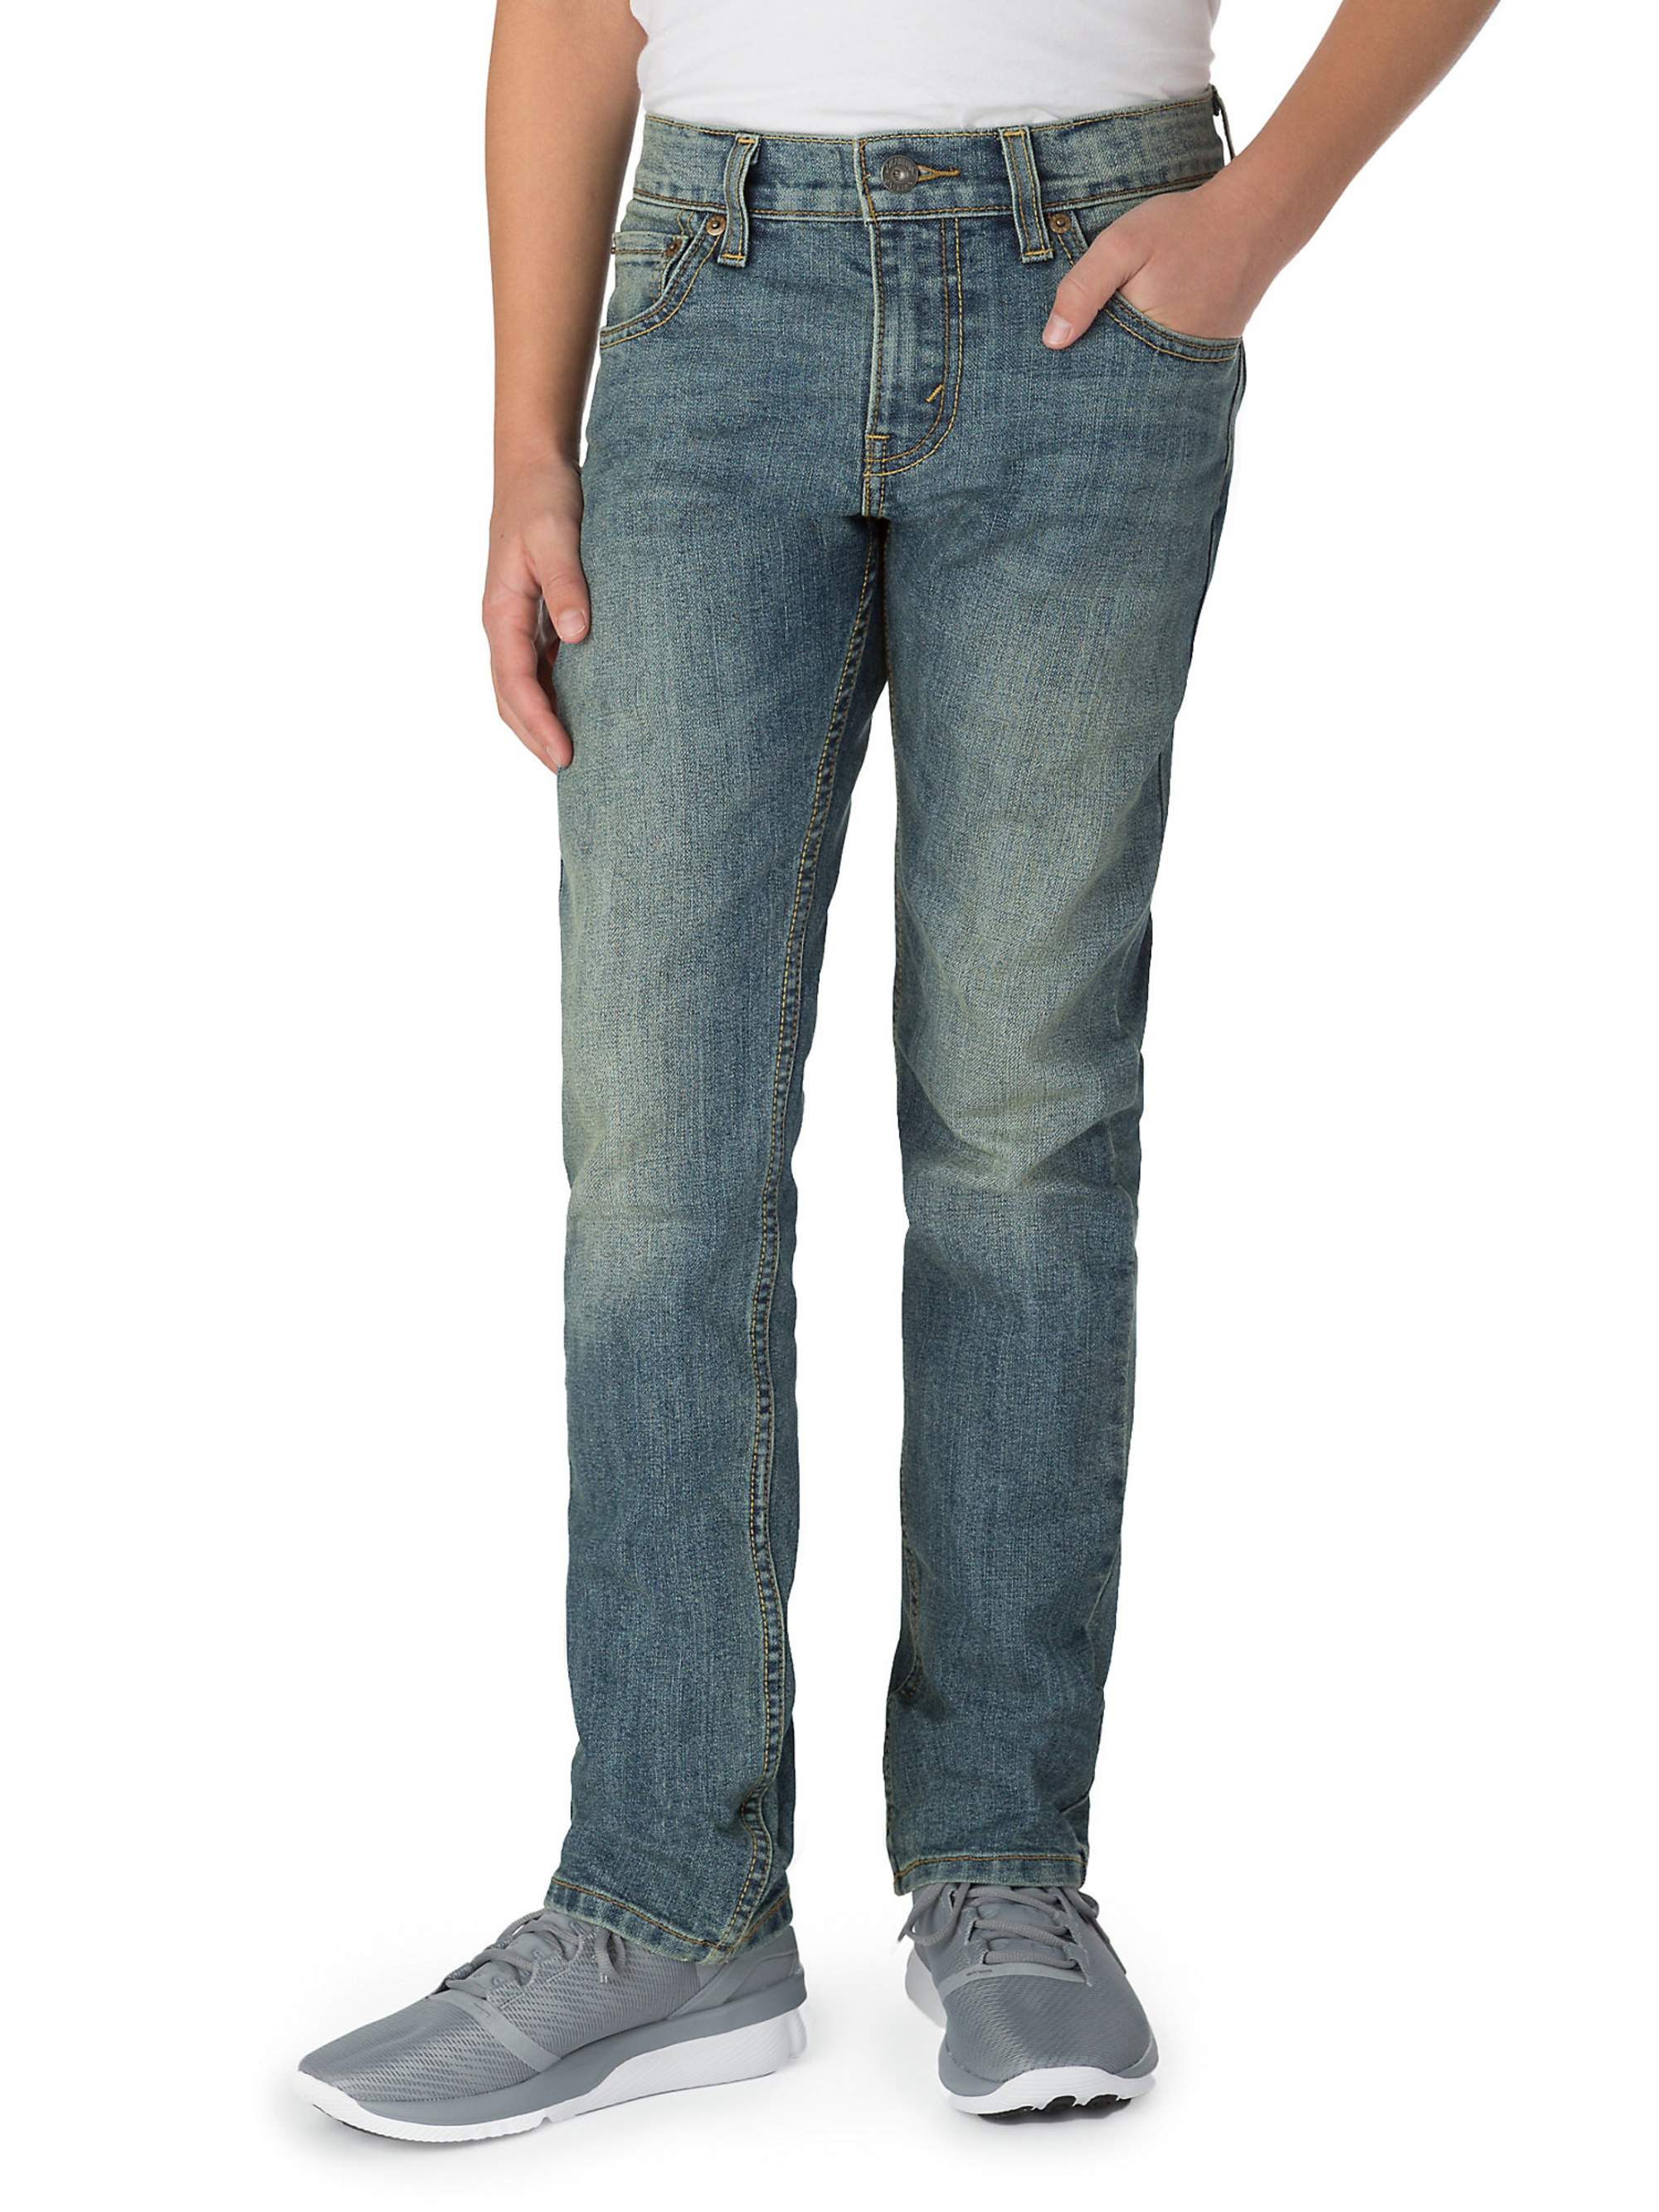 Signature by Levi Strauss & Co. Boys Skinny Fit Jeans Sizes 4-18 - image 1 of 3